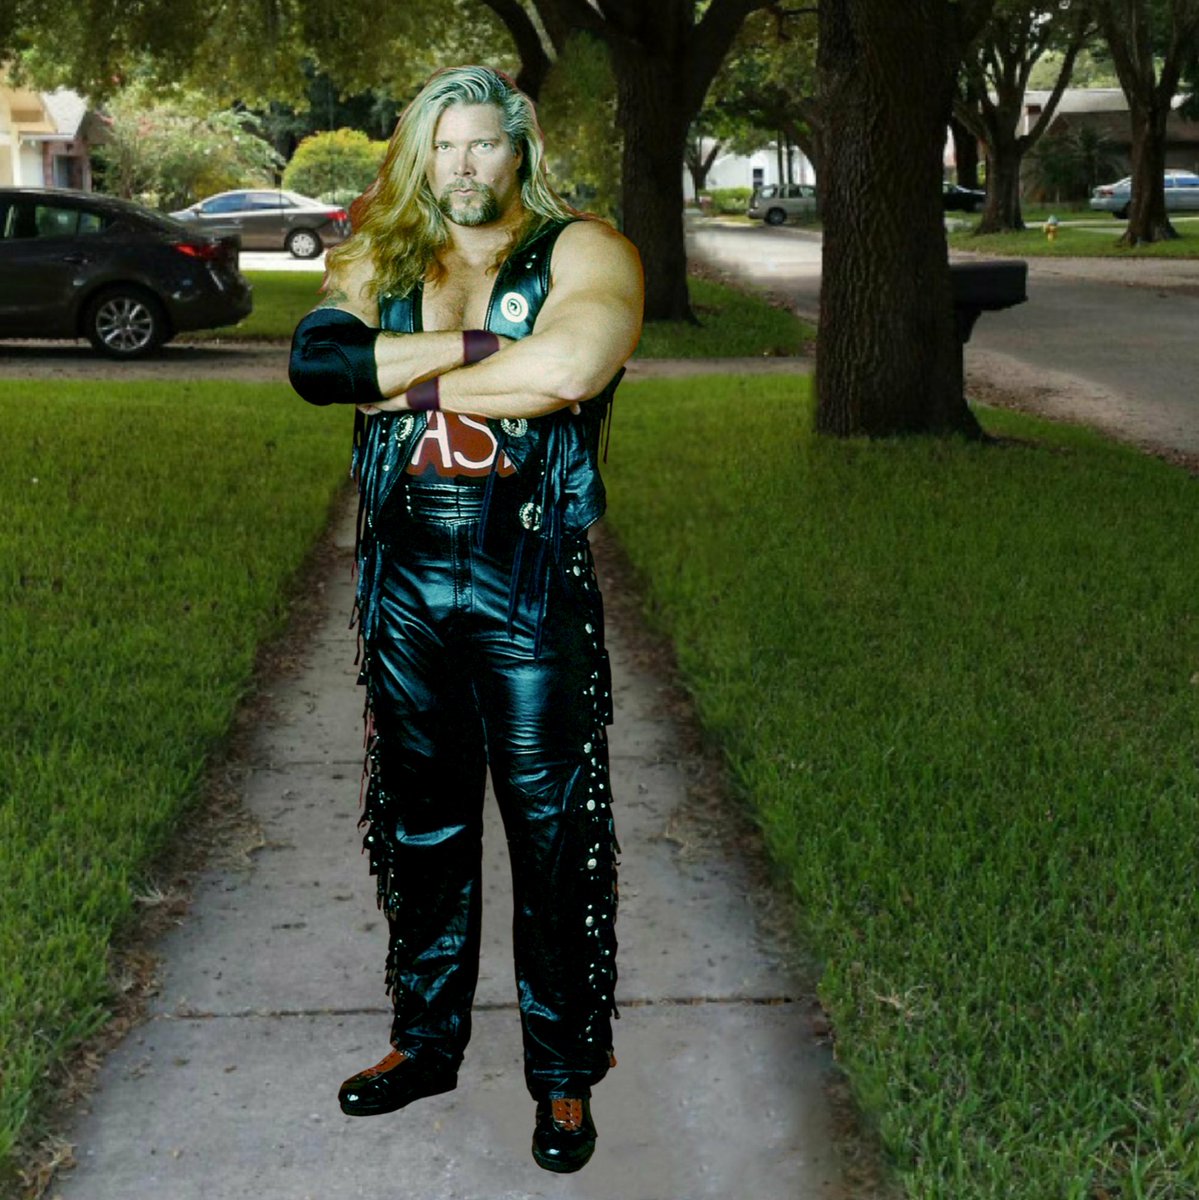 He had to do it to em